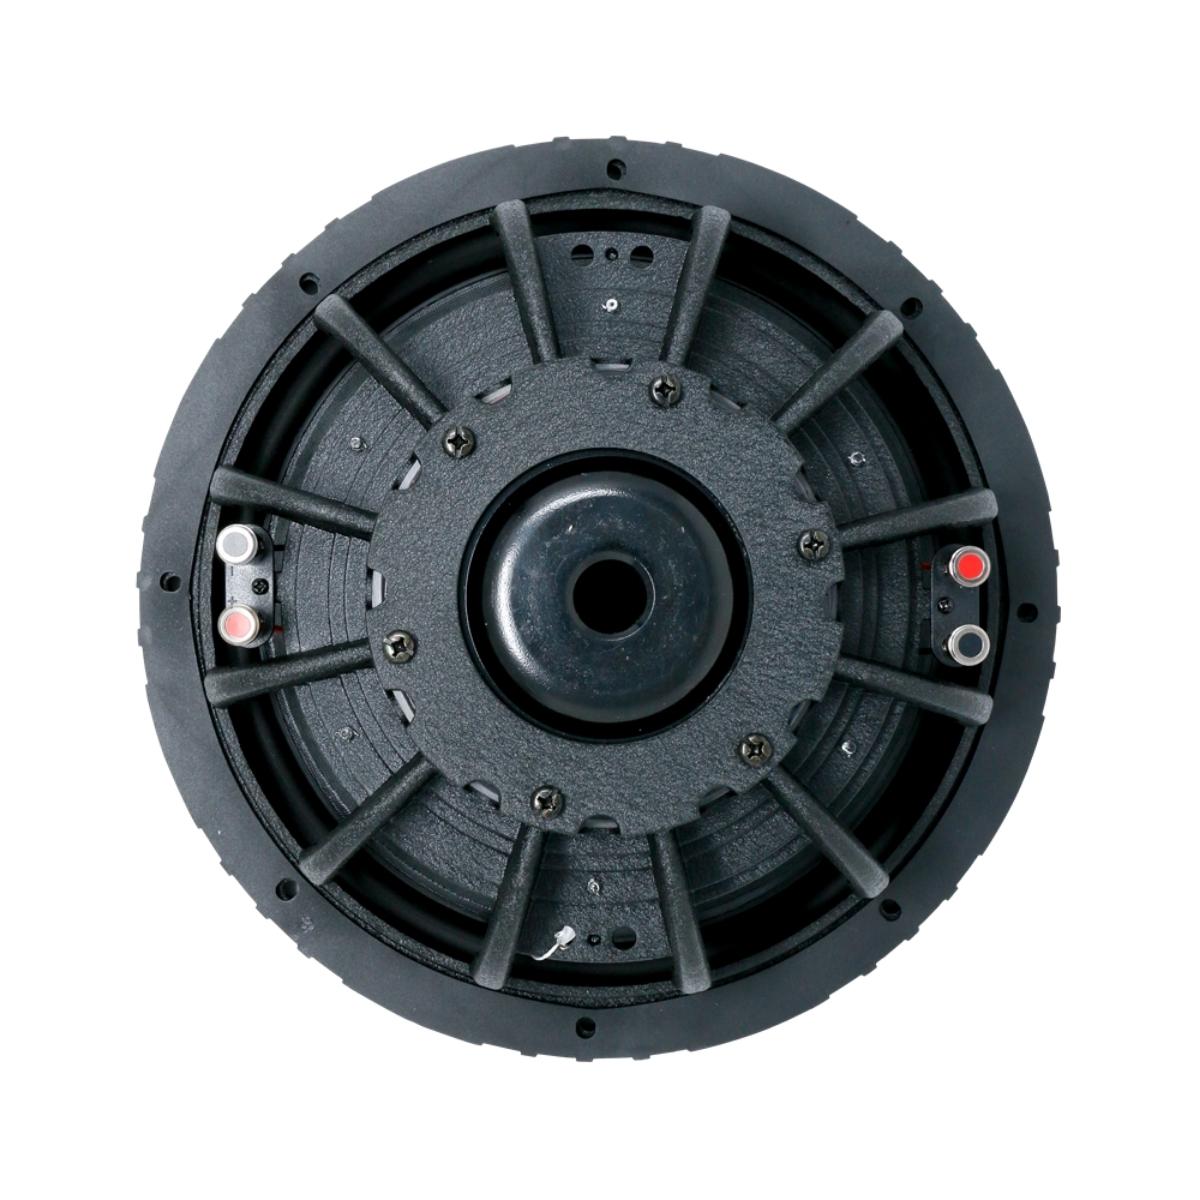 VMAXS 12" 400W RMS 4Ω High-Performance Shallow Series Subwoofer